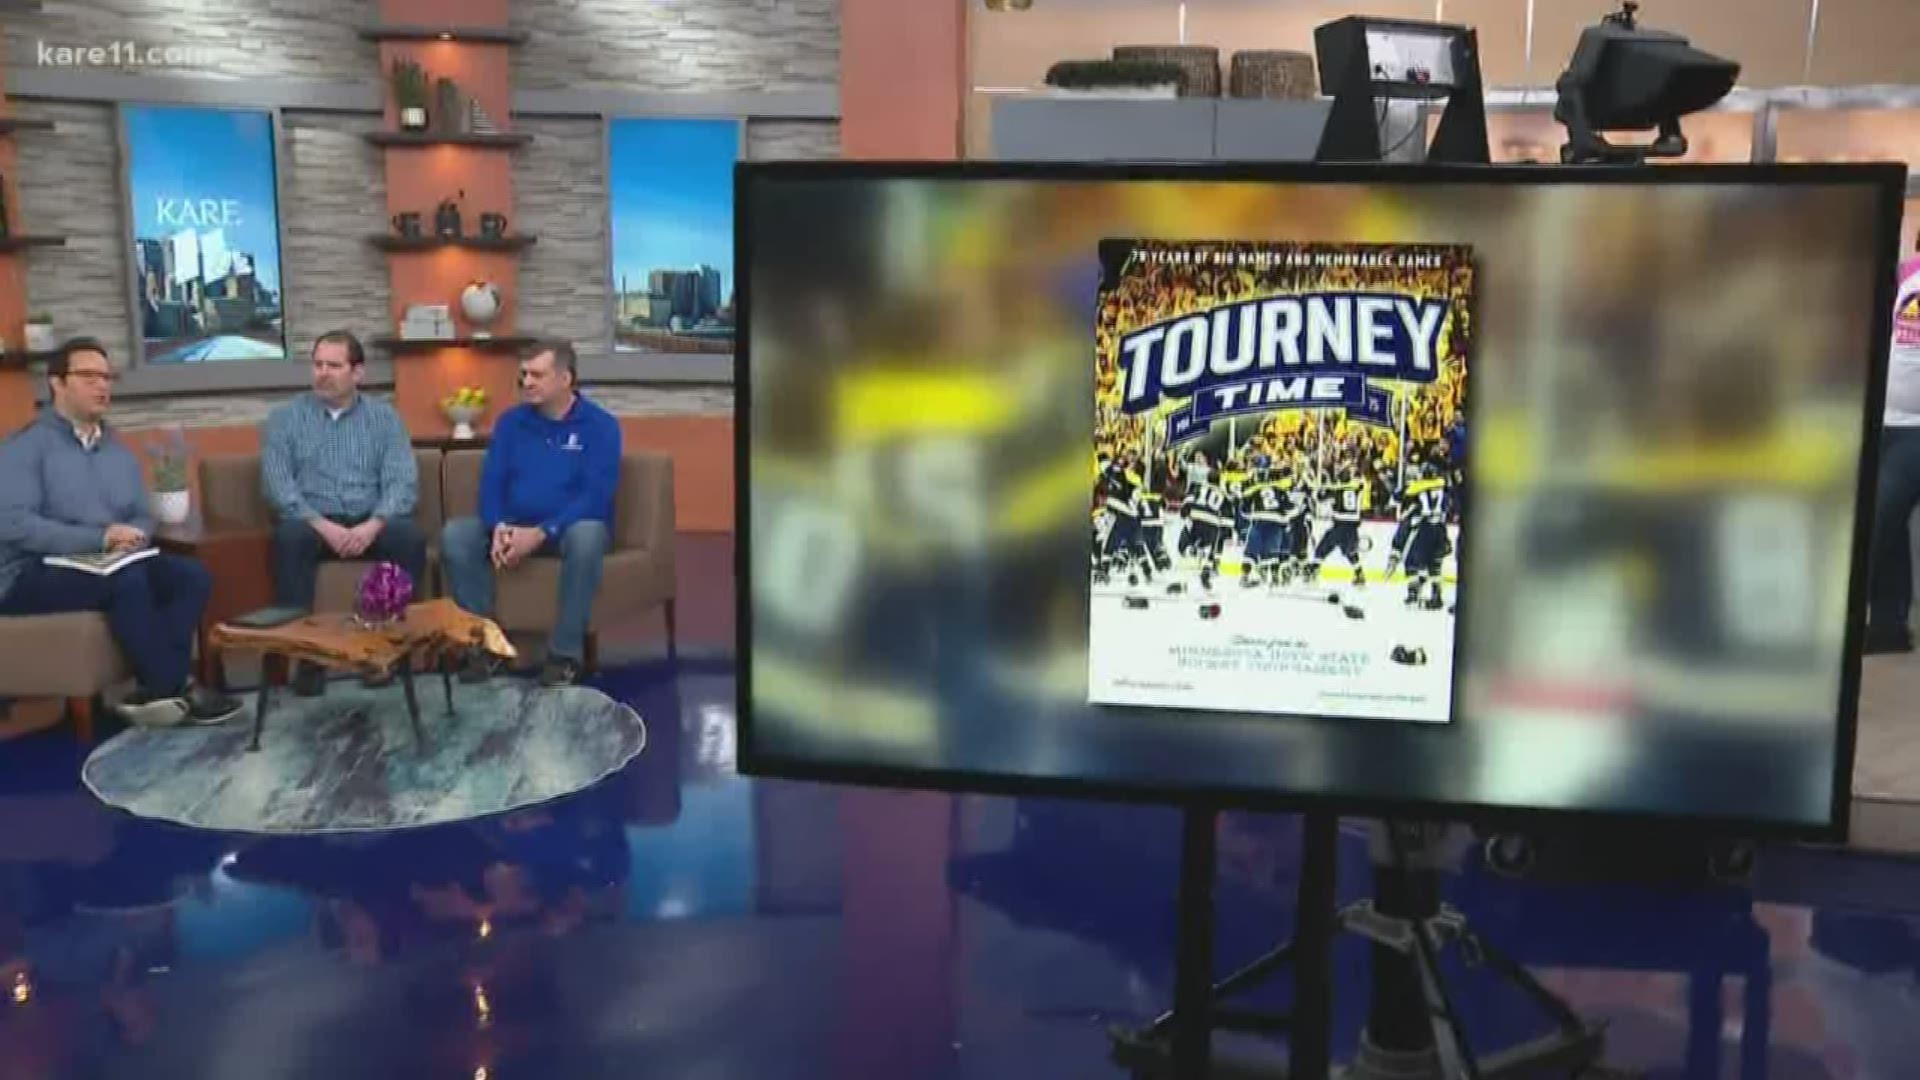 The book “Tourney Time” has inside stories and history from the first 75 years of the Minnesota boys’ hockey state tournament.